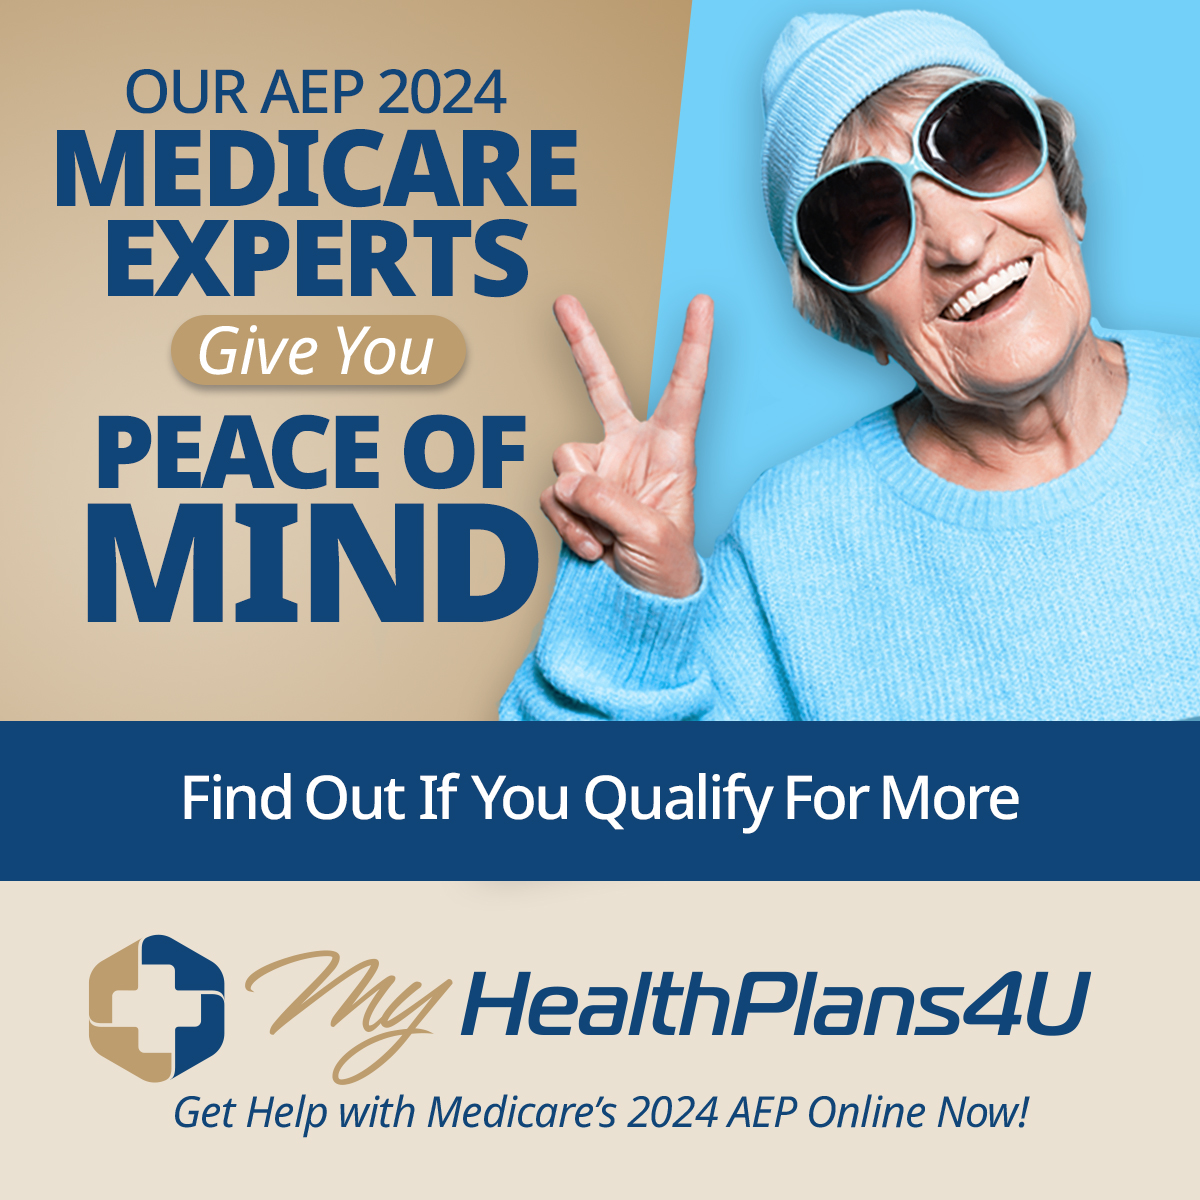 Our AEP 2024 Medicare experts give you peace of mind. Find out if you qualify for more. My Health Plans 4 u. Get help with Medicare's 2024 AEP online now!